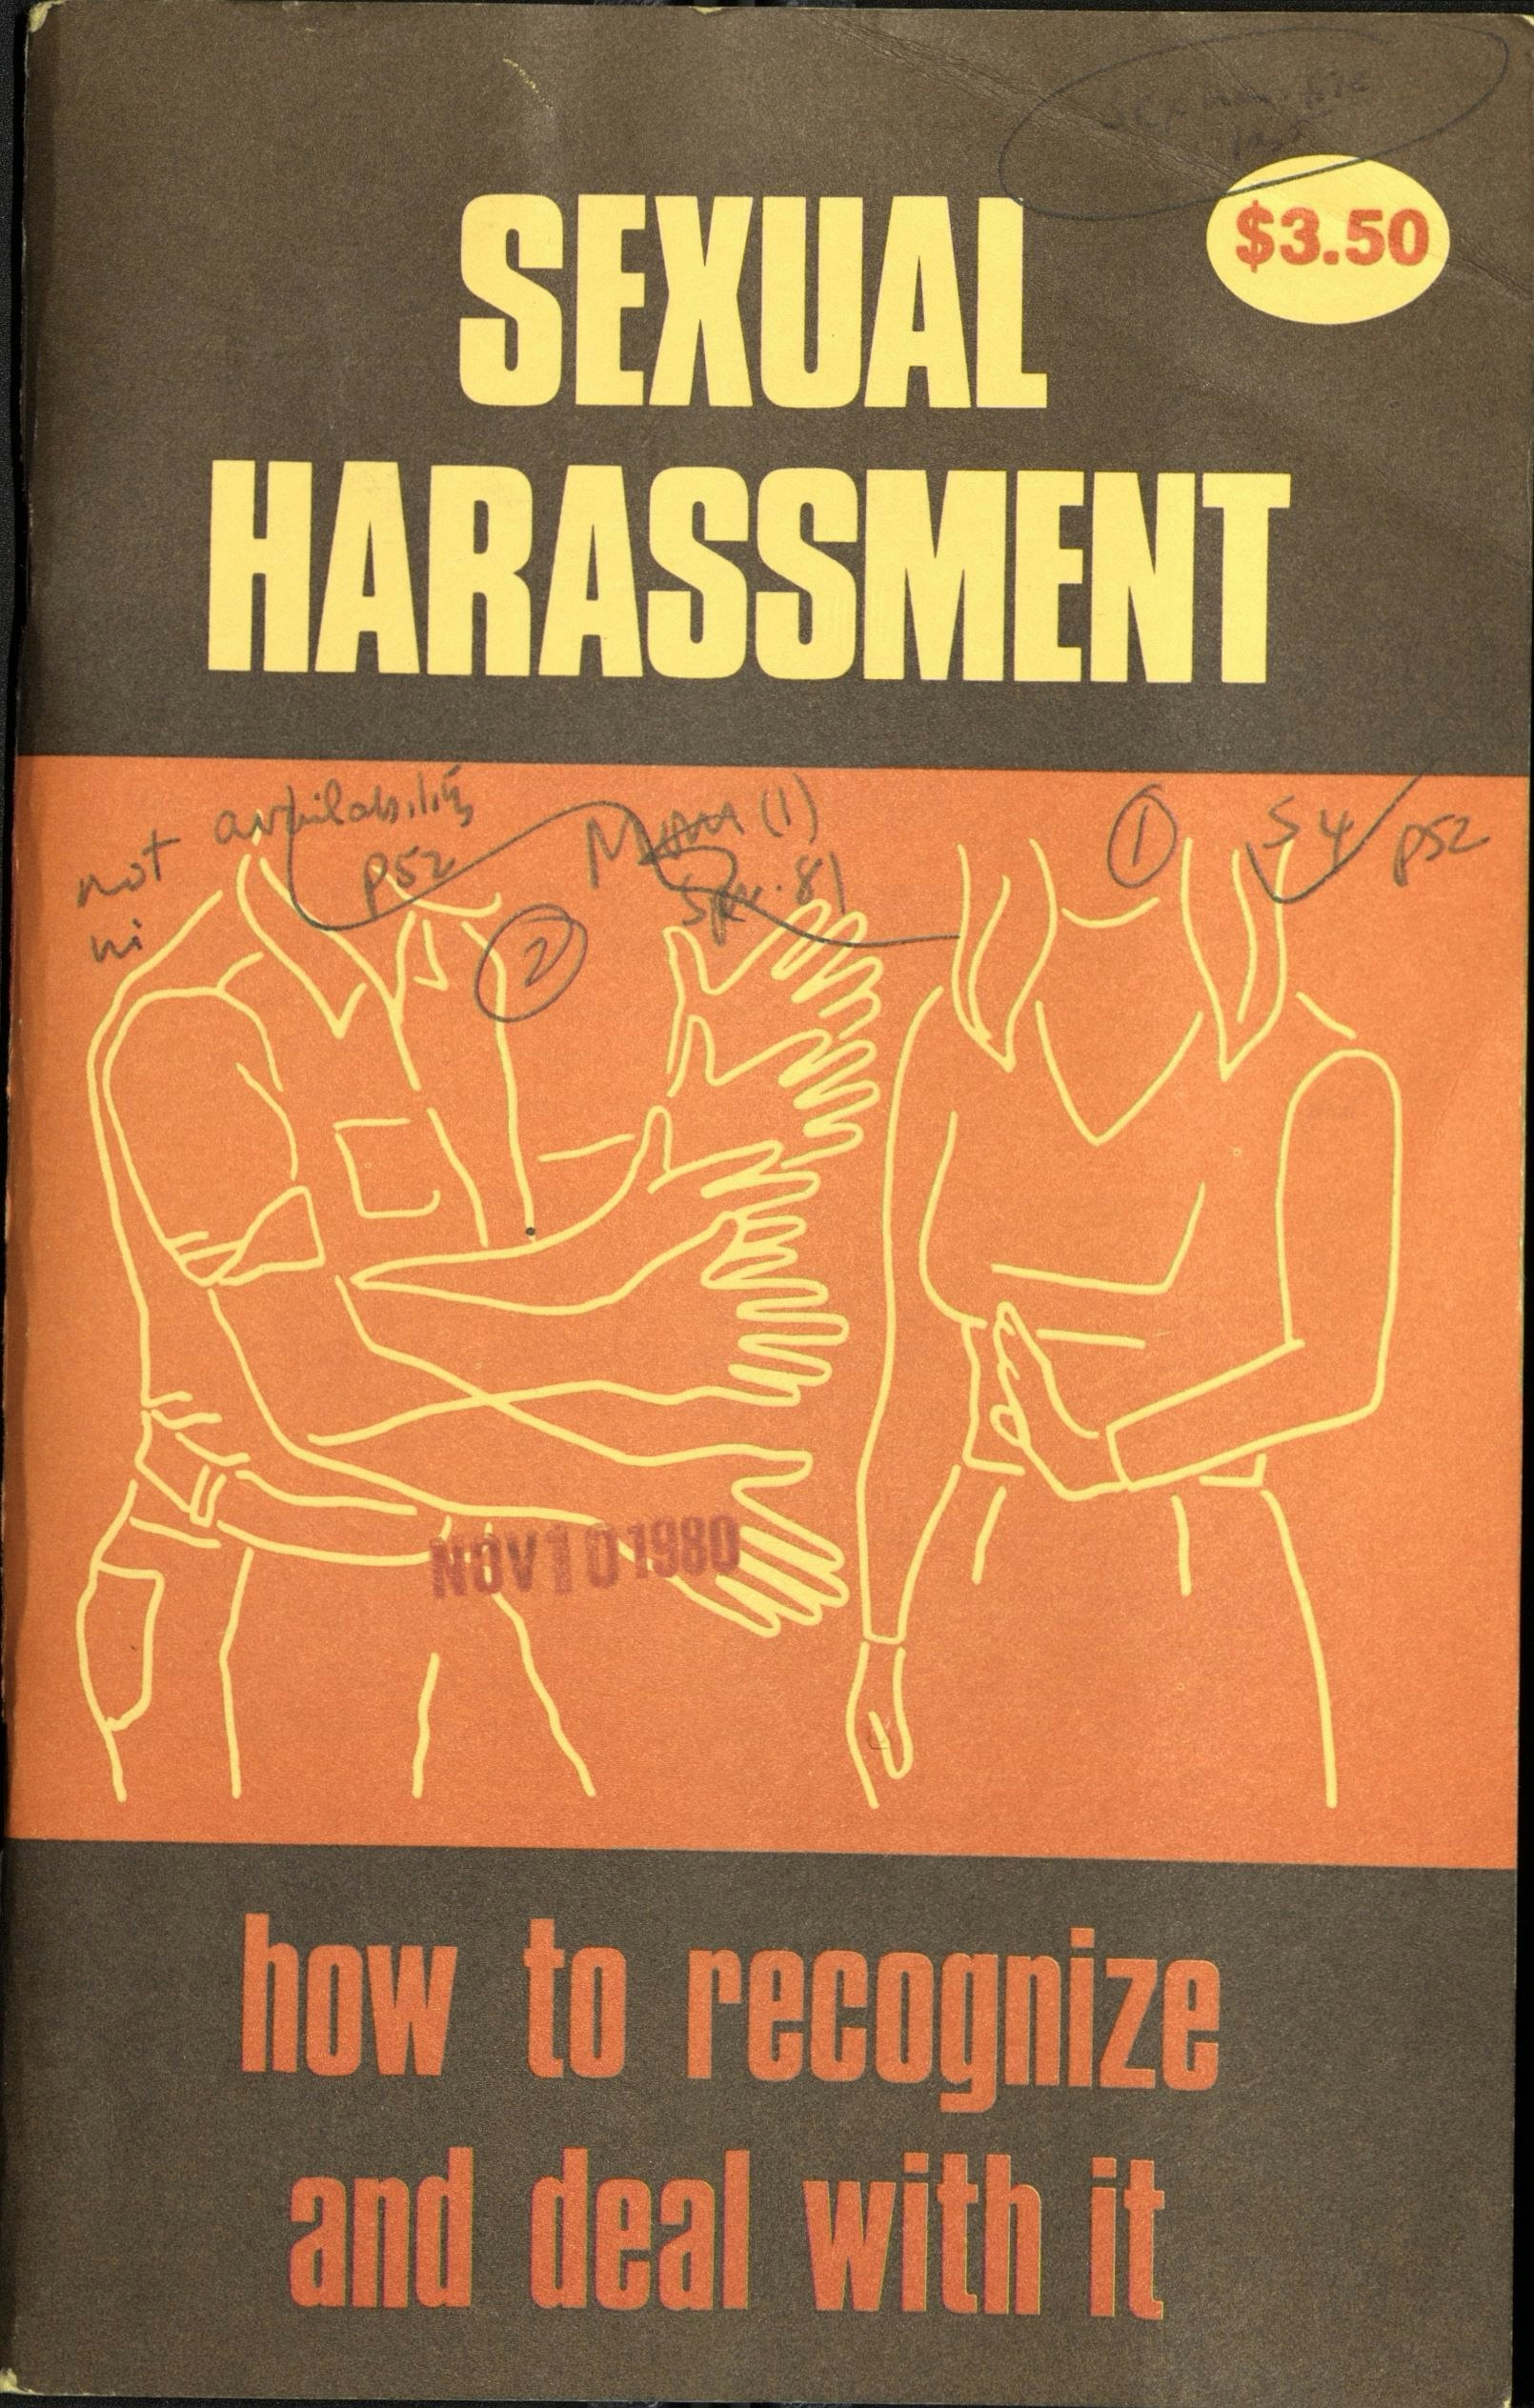 Book on sexual harassment